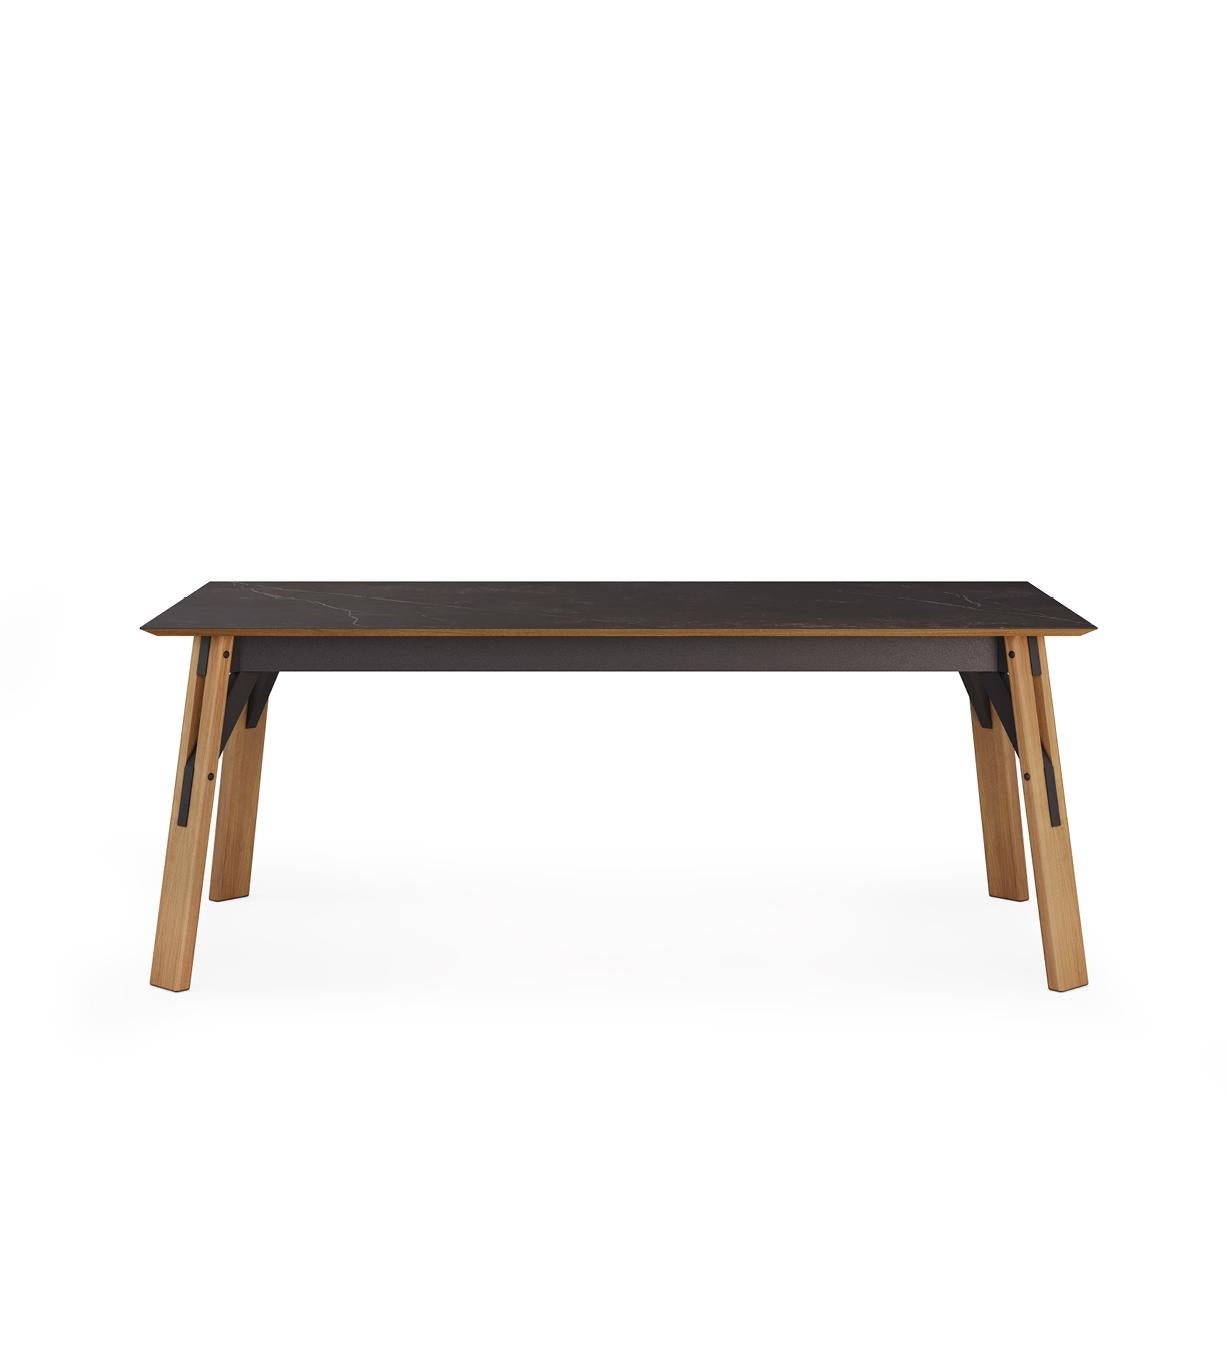 A classic design with modern details. The shape of the table expresses a complicated simplicity with geometric forms. With an extensible top, the table offers plenty of space for large gatherings. Sits comfortably 6 (+4) people. 